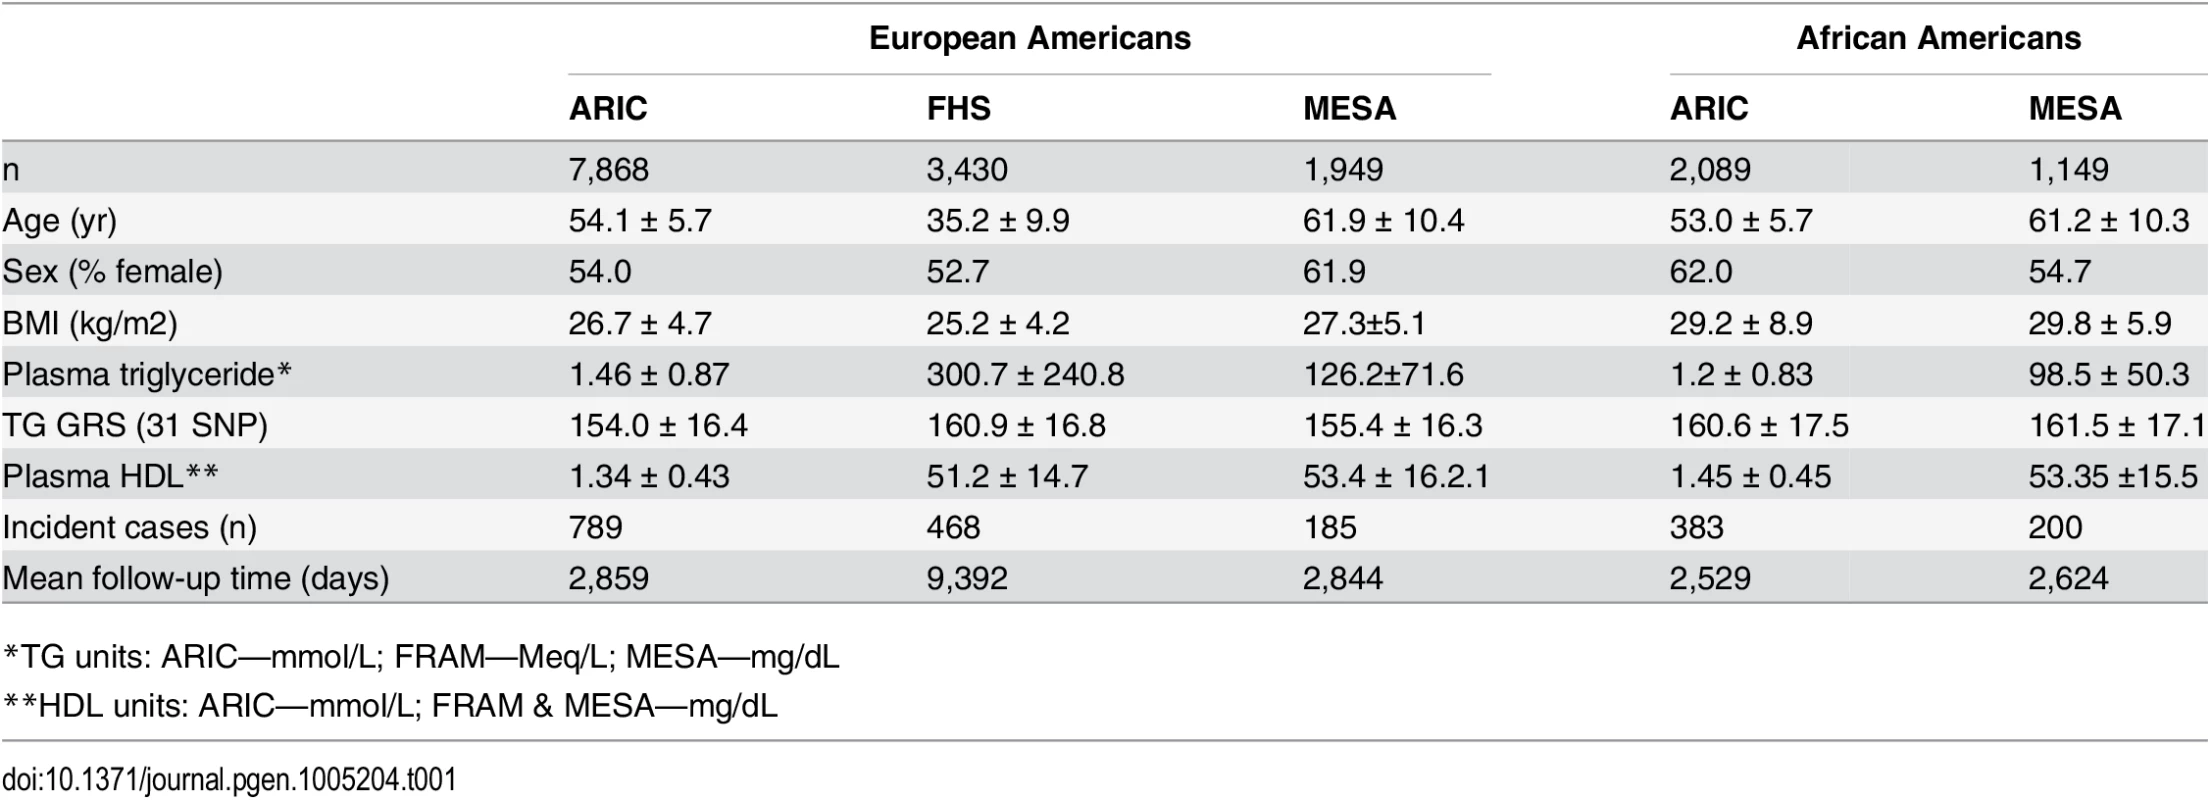 Characteristics of the three samples of European-Americans and two samples of African-Americans.